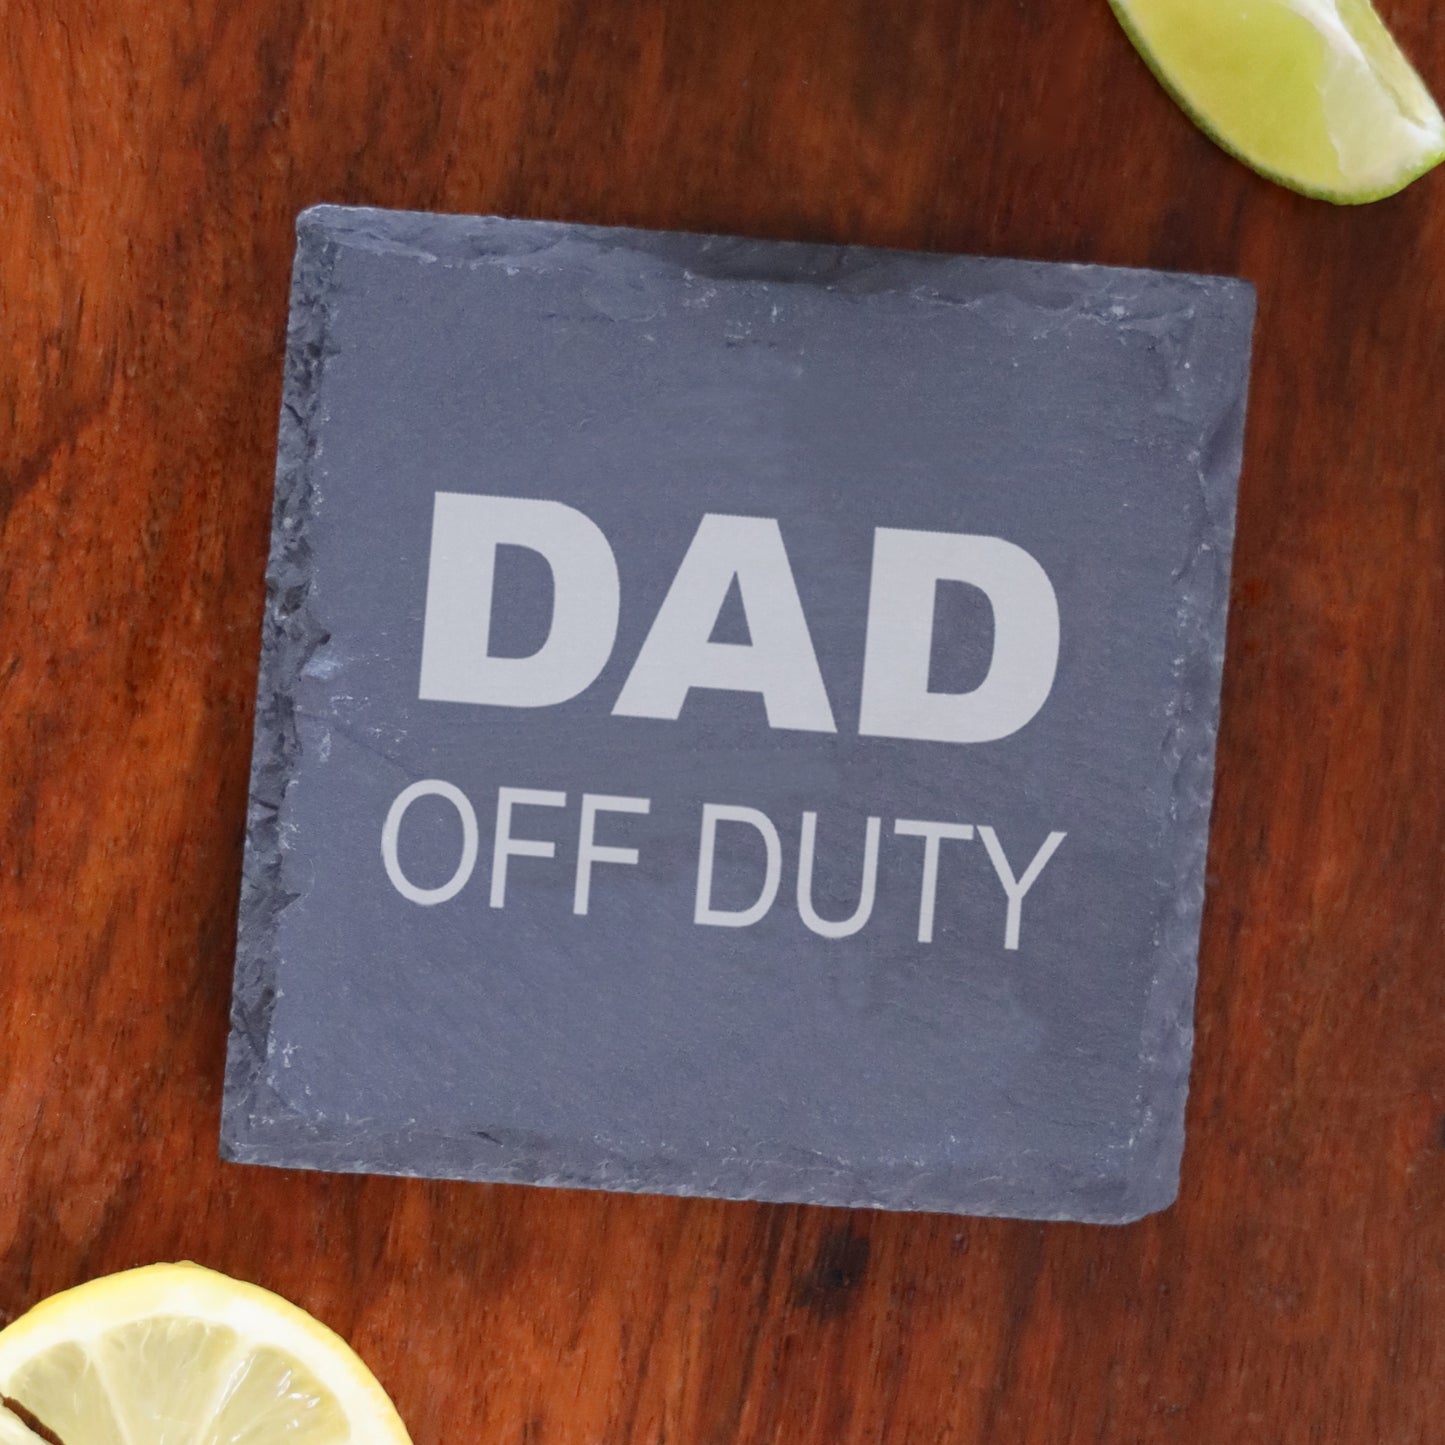 Engraved "Dad Off Duty" Novelty Whisky Glass and/or Coaster Set  - Always Looking Good - Square Coaster Only  